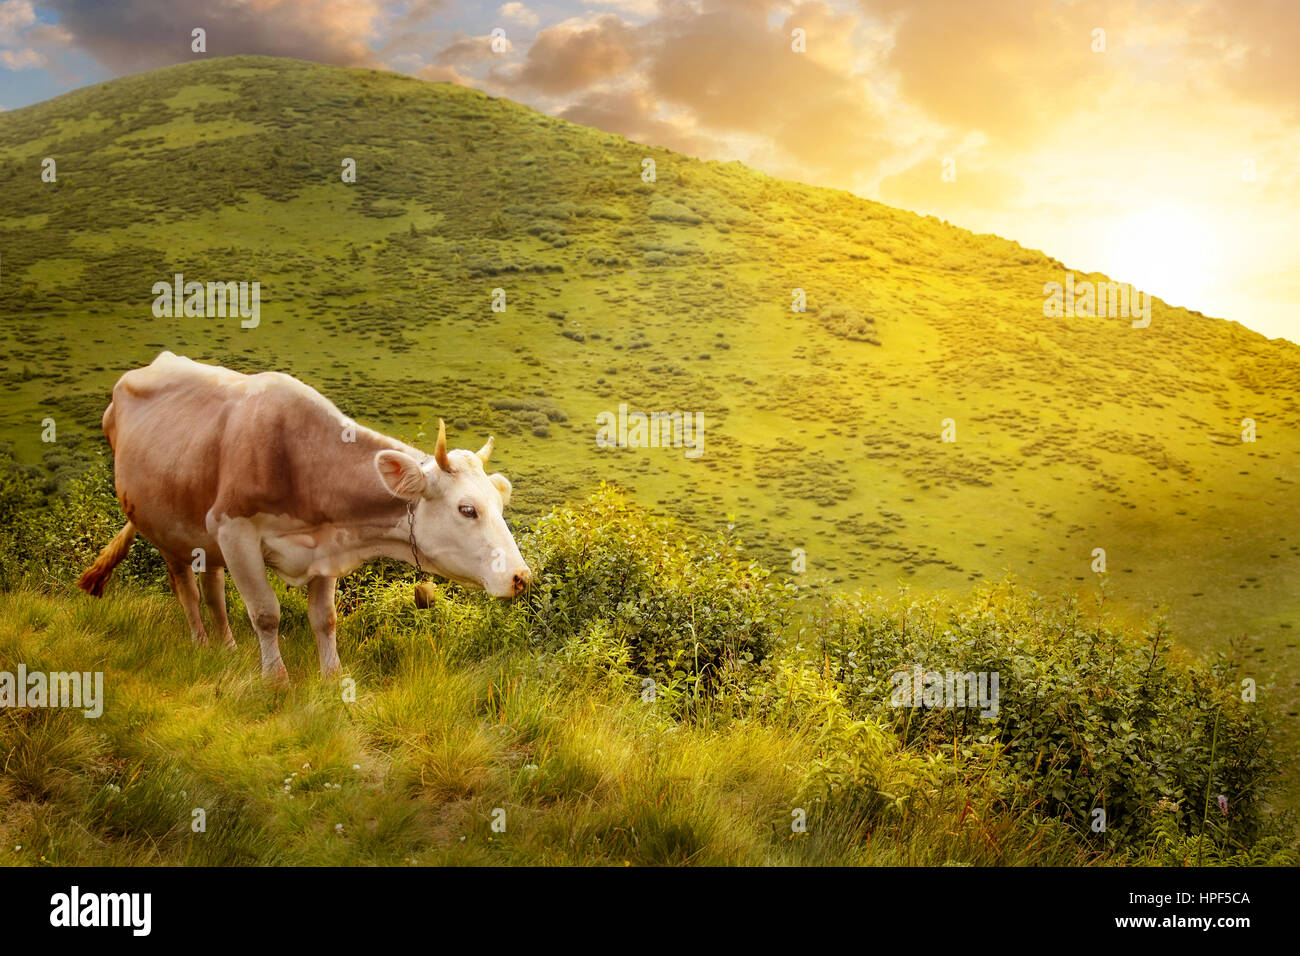 cow grazing on meadow in mountains. Cattle on a mountain pasture. Cow grazing on hill on a background of mountain scenery at sunset or sunrise Stock Photo